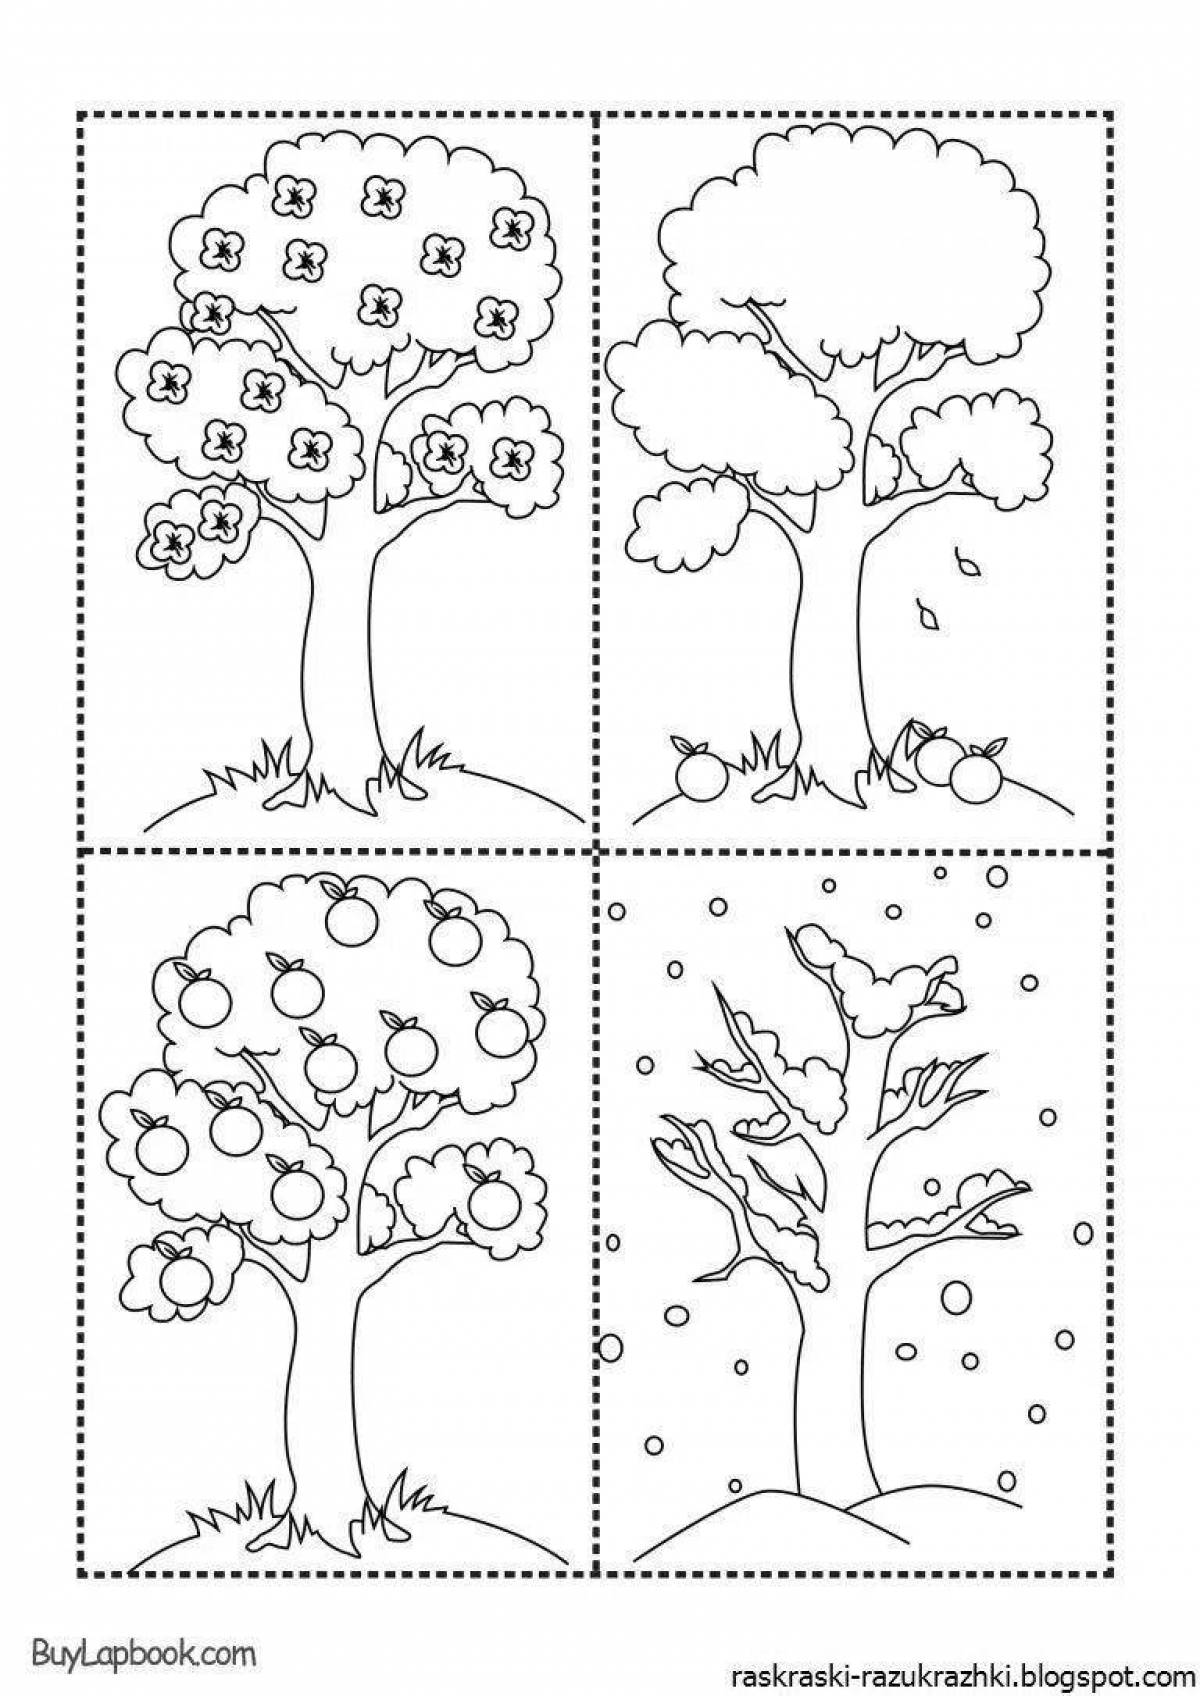 Sunny summer coloring page